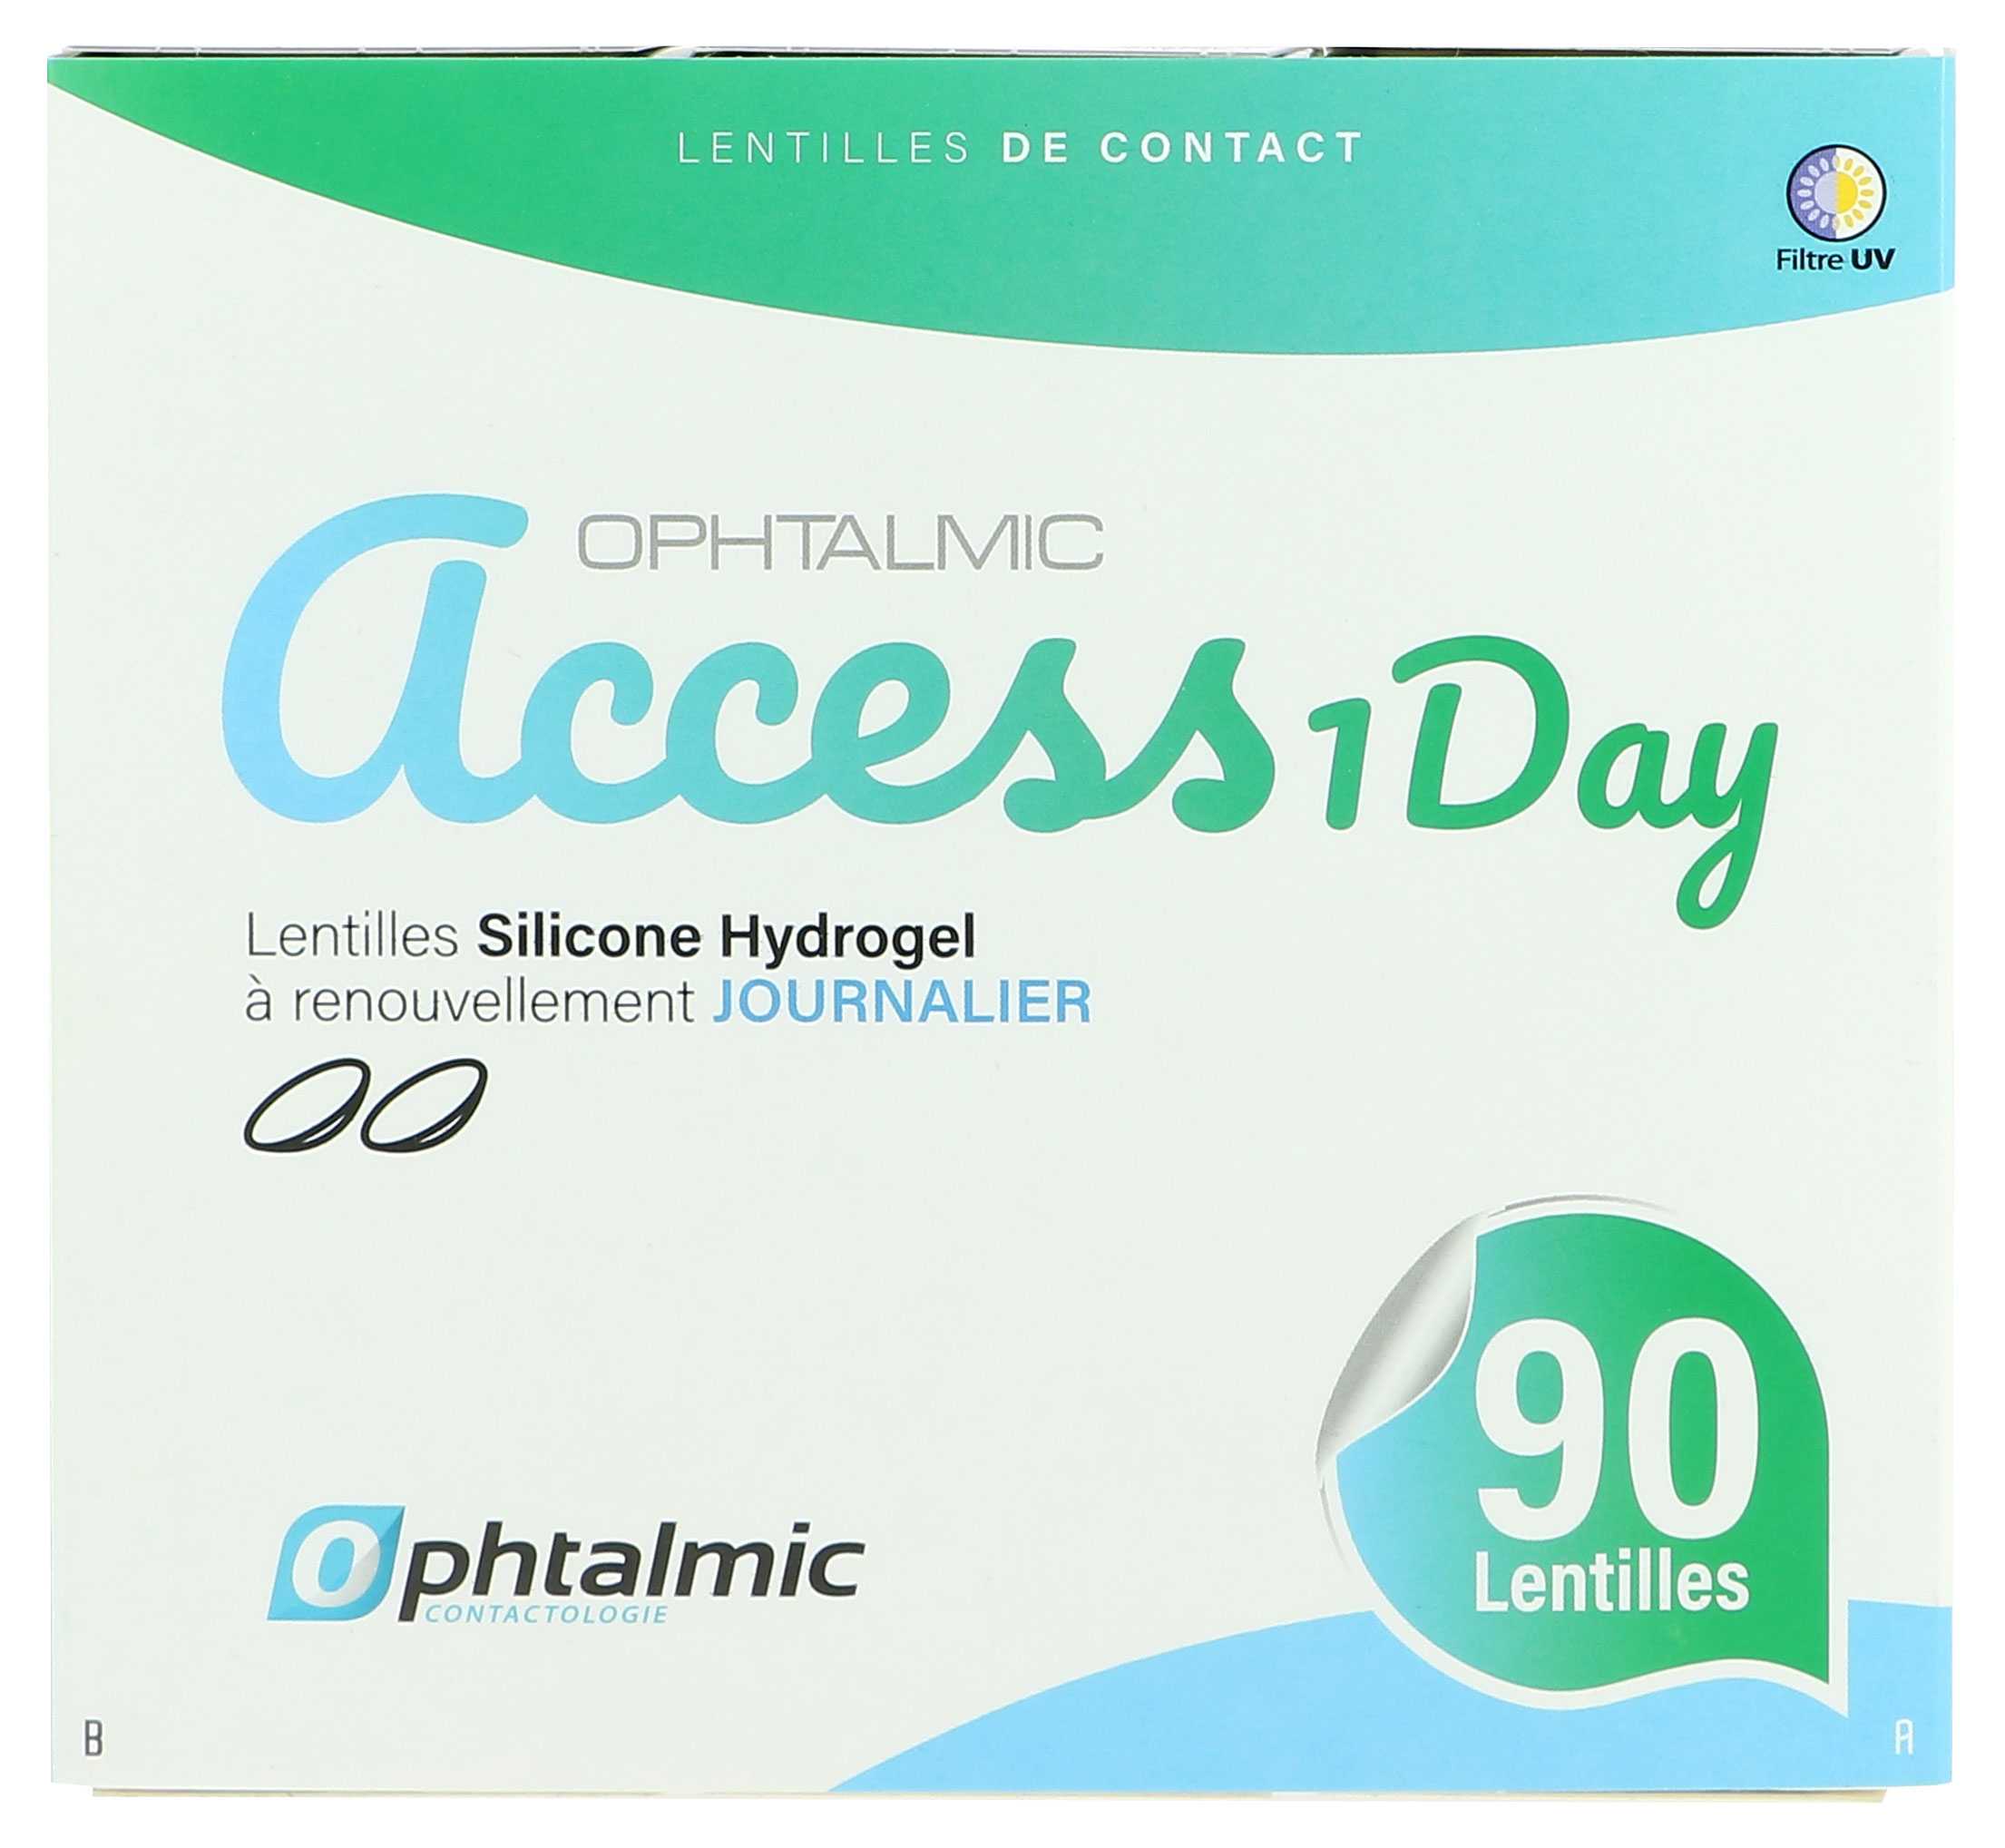  ACCESS 1DAY 90 OPHTALMIC